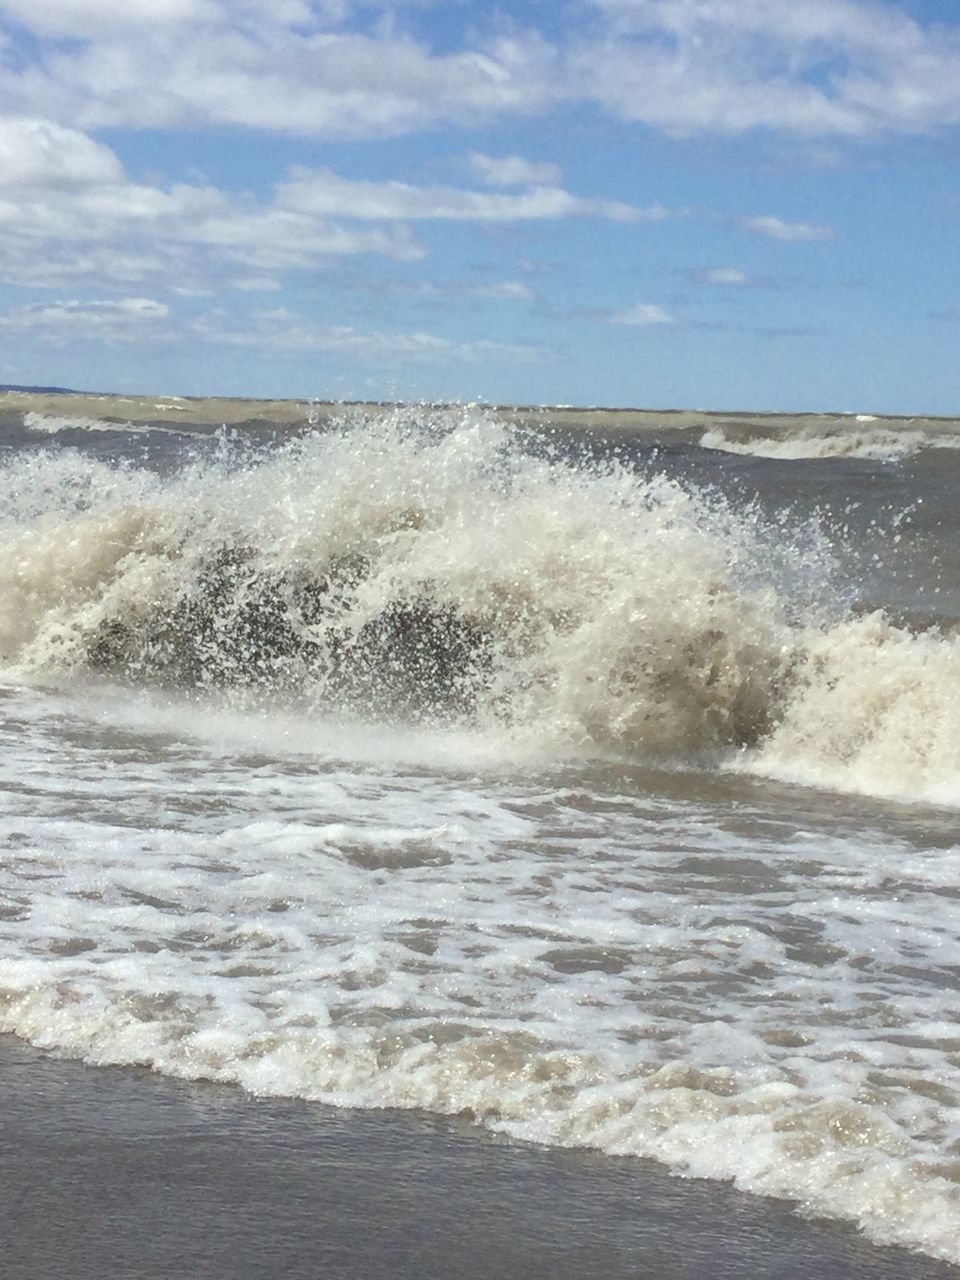 sea, wave, motion, power in nature, force, nature, water, beauty in nature, crash, no people, breaking, horizon over water, rough, sky, day, hitting, scenics, outdoors